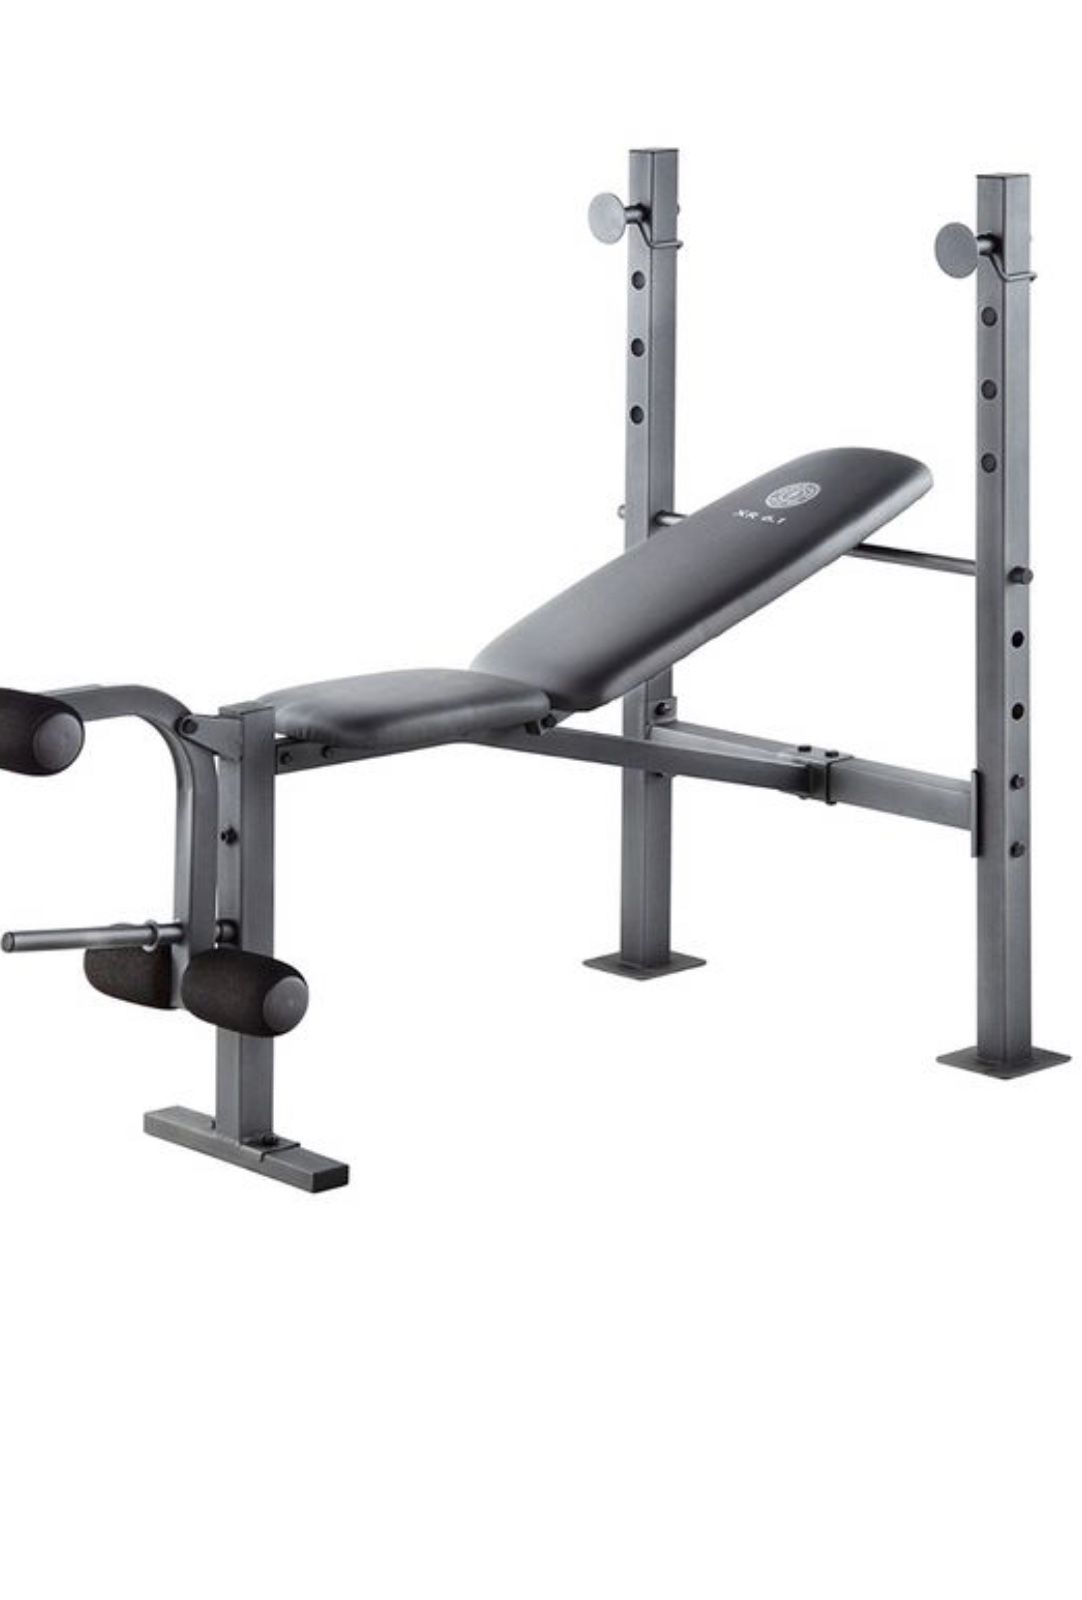 Weider XR 6.1 Multi-Position Weight Bench with Leg Developer and Exercise Chart Bench Press